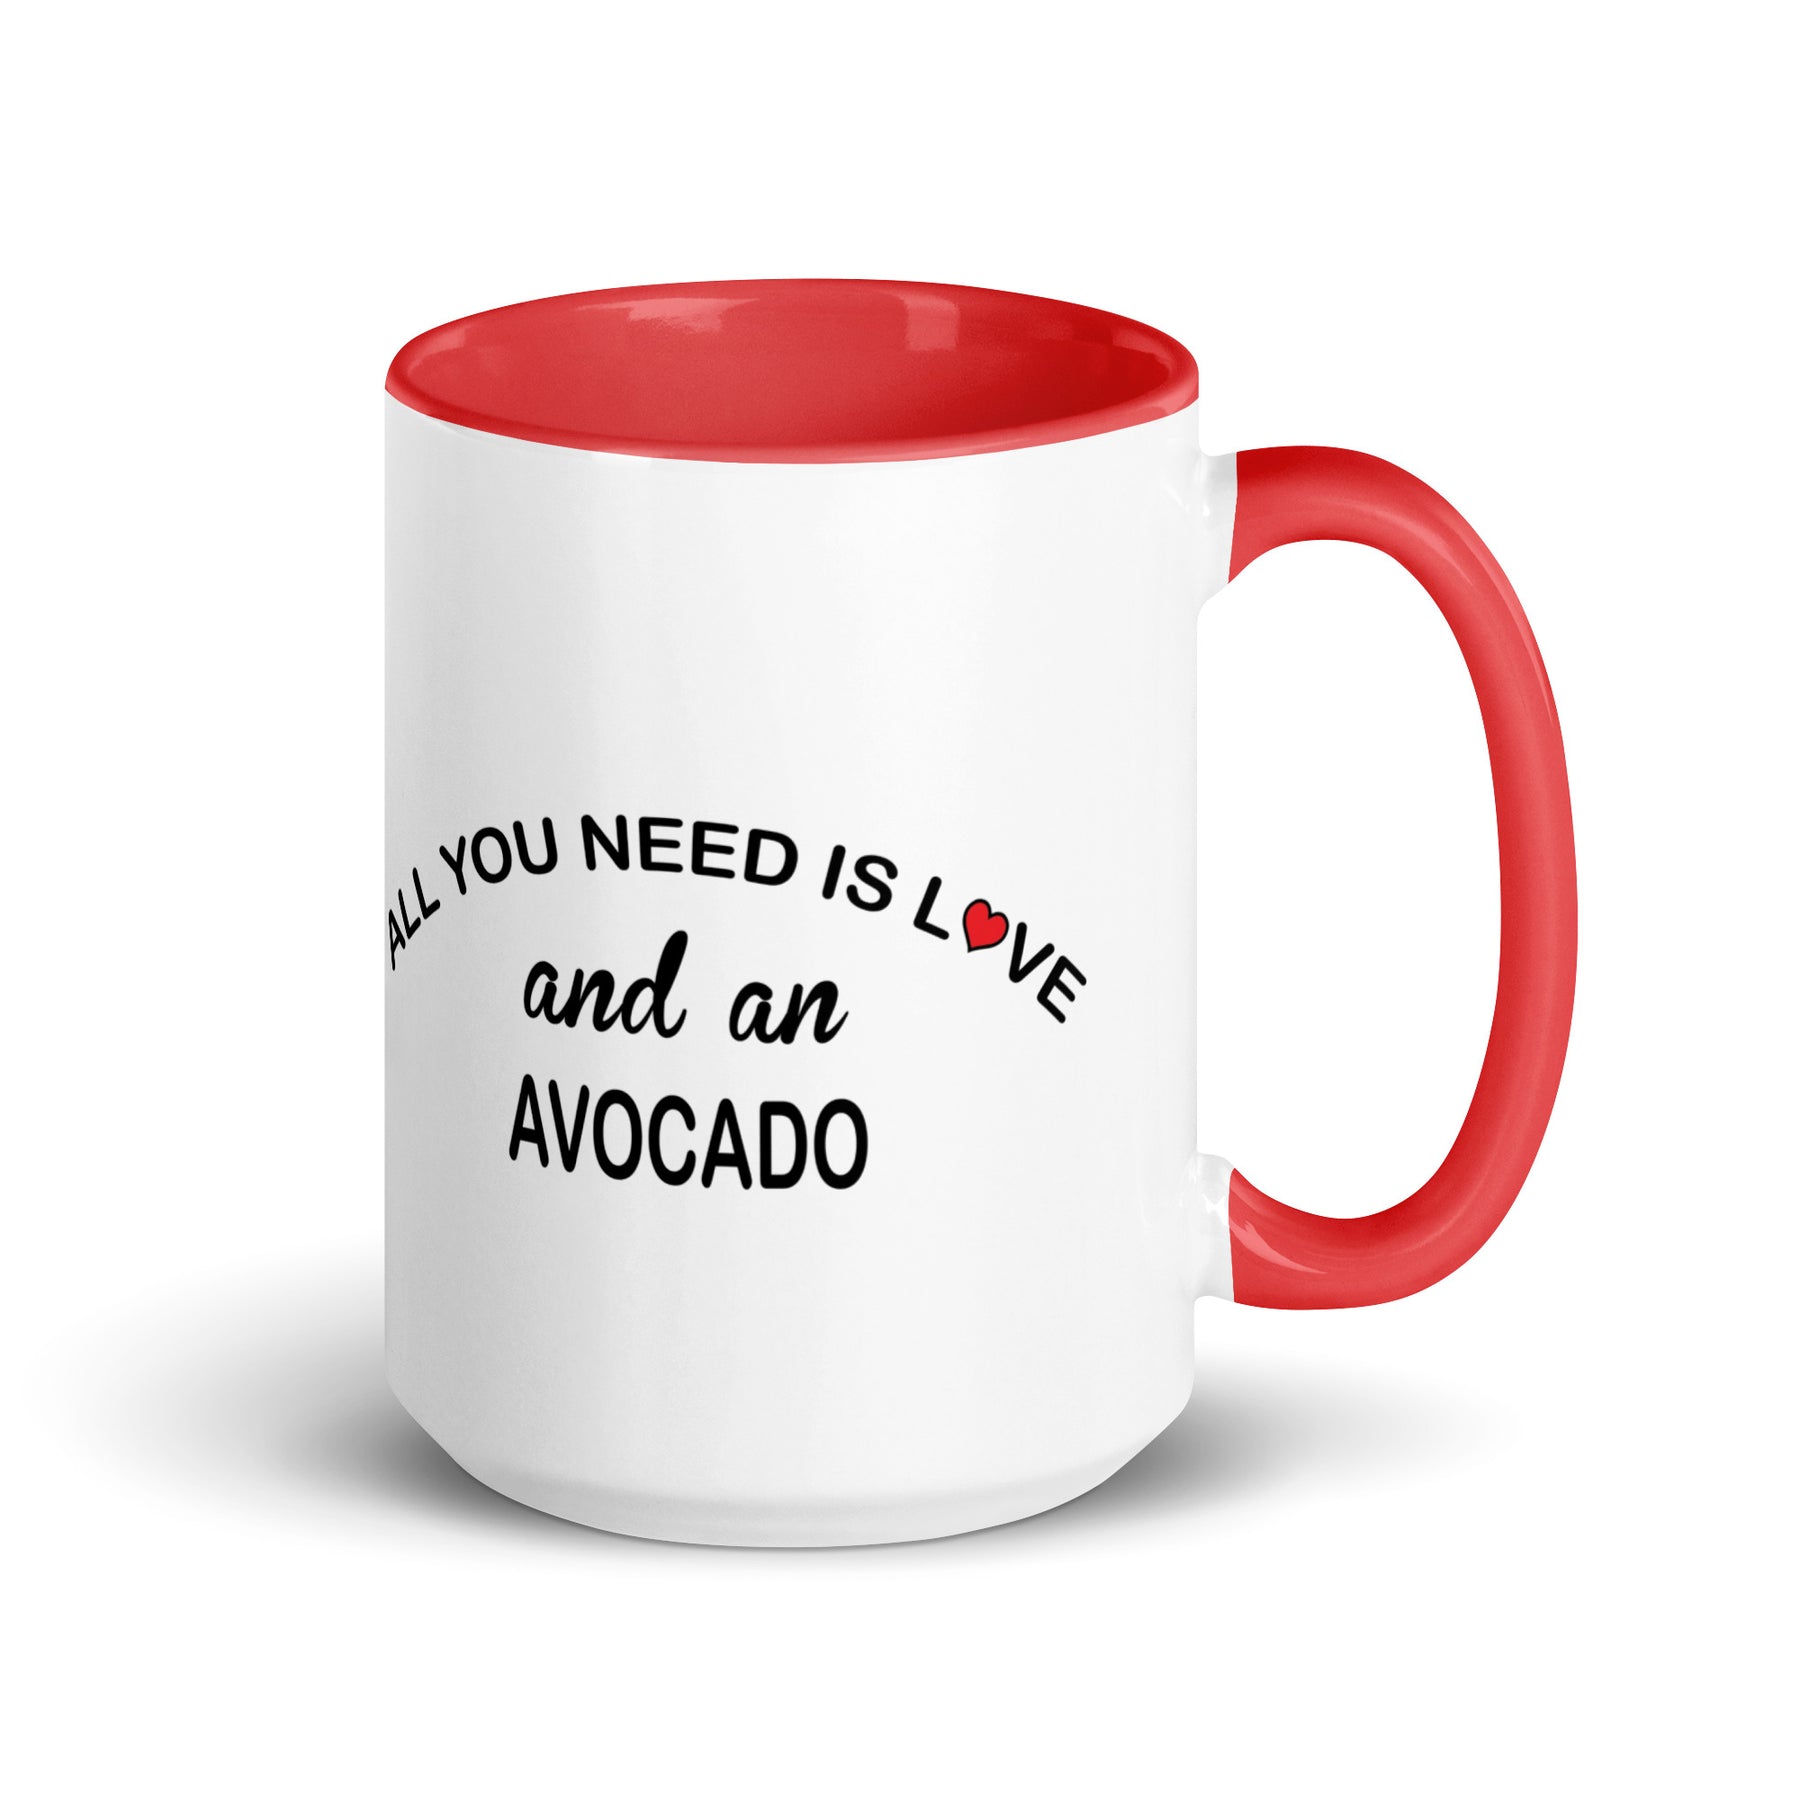 ALL YOU NEED IS LOVE...AVOCADO Mug with Color Inside